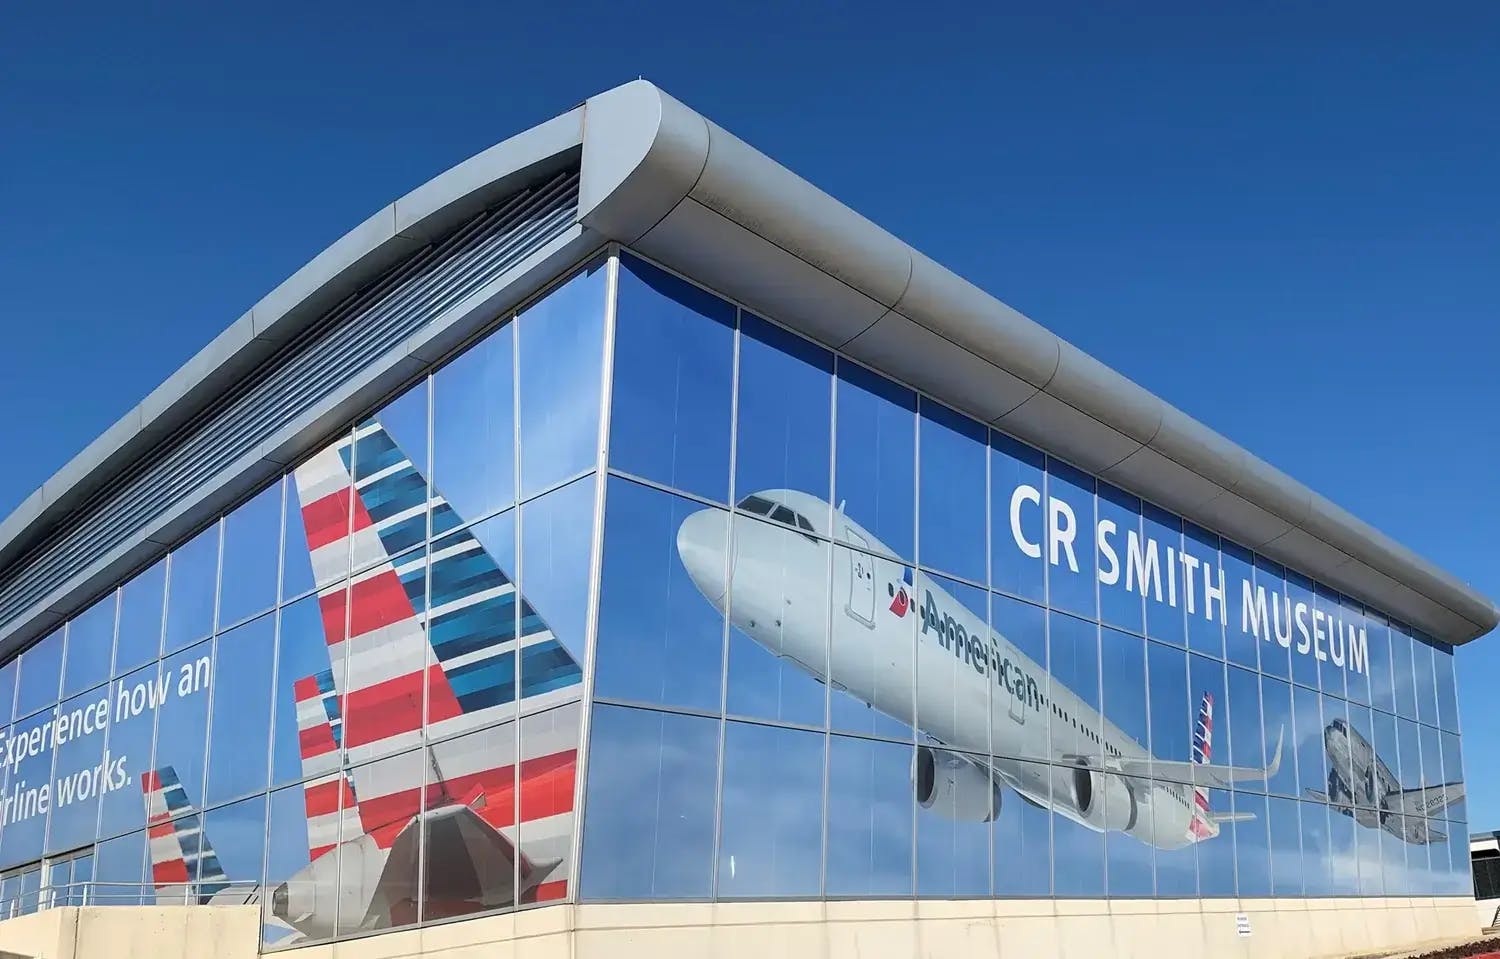 American Airlines CR Smith Museum website redesigned by WE+DA Studio